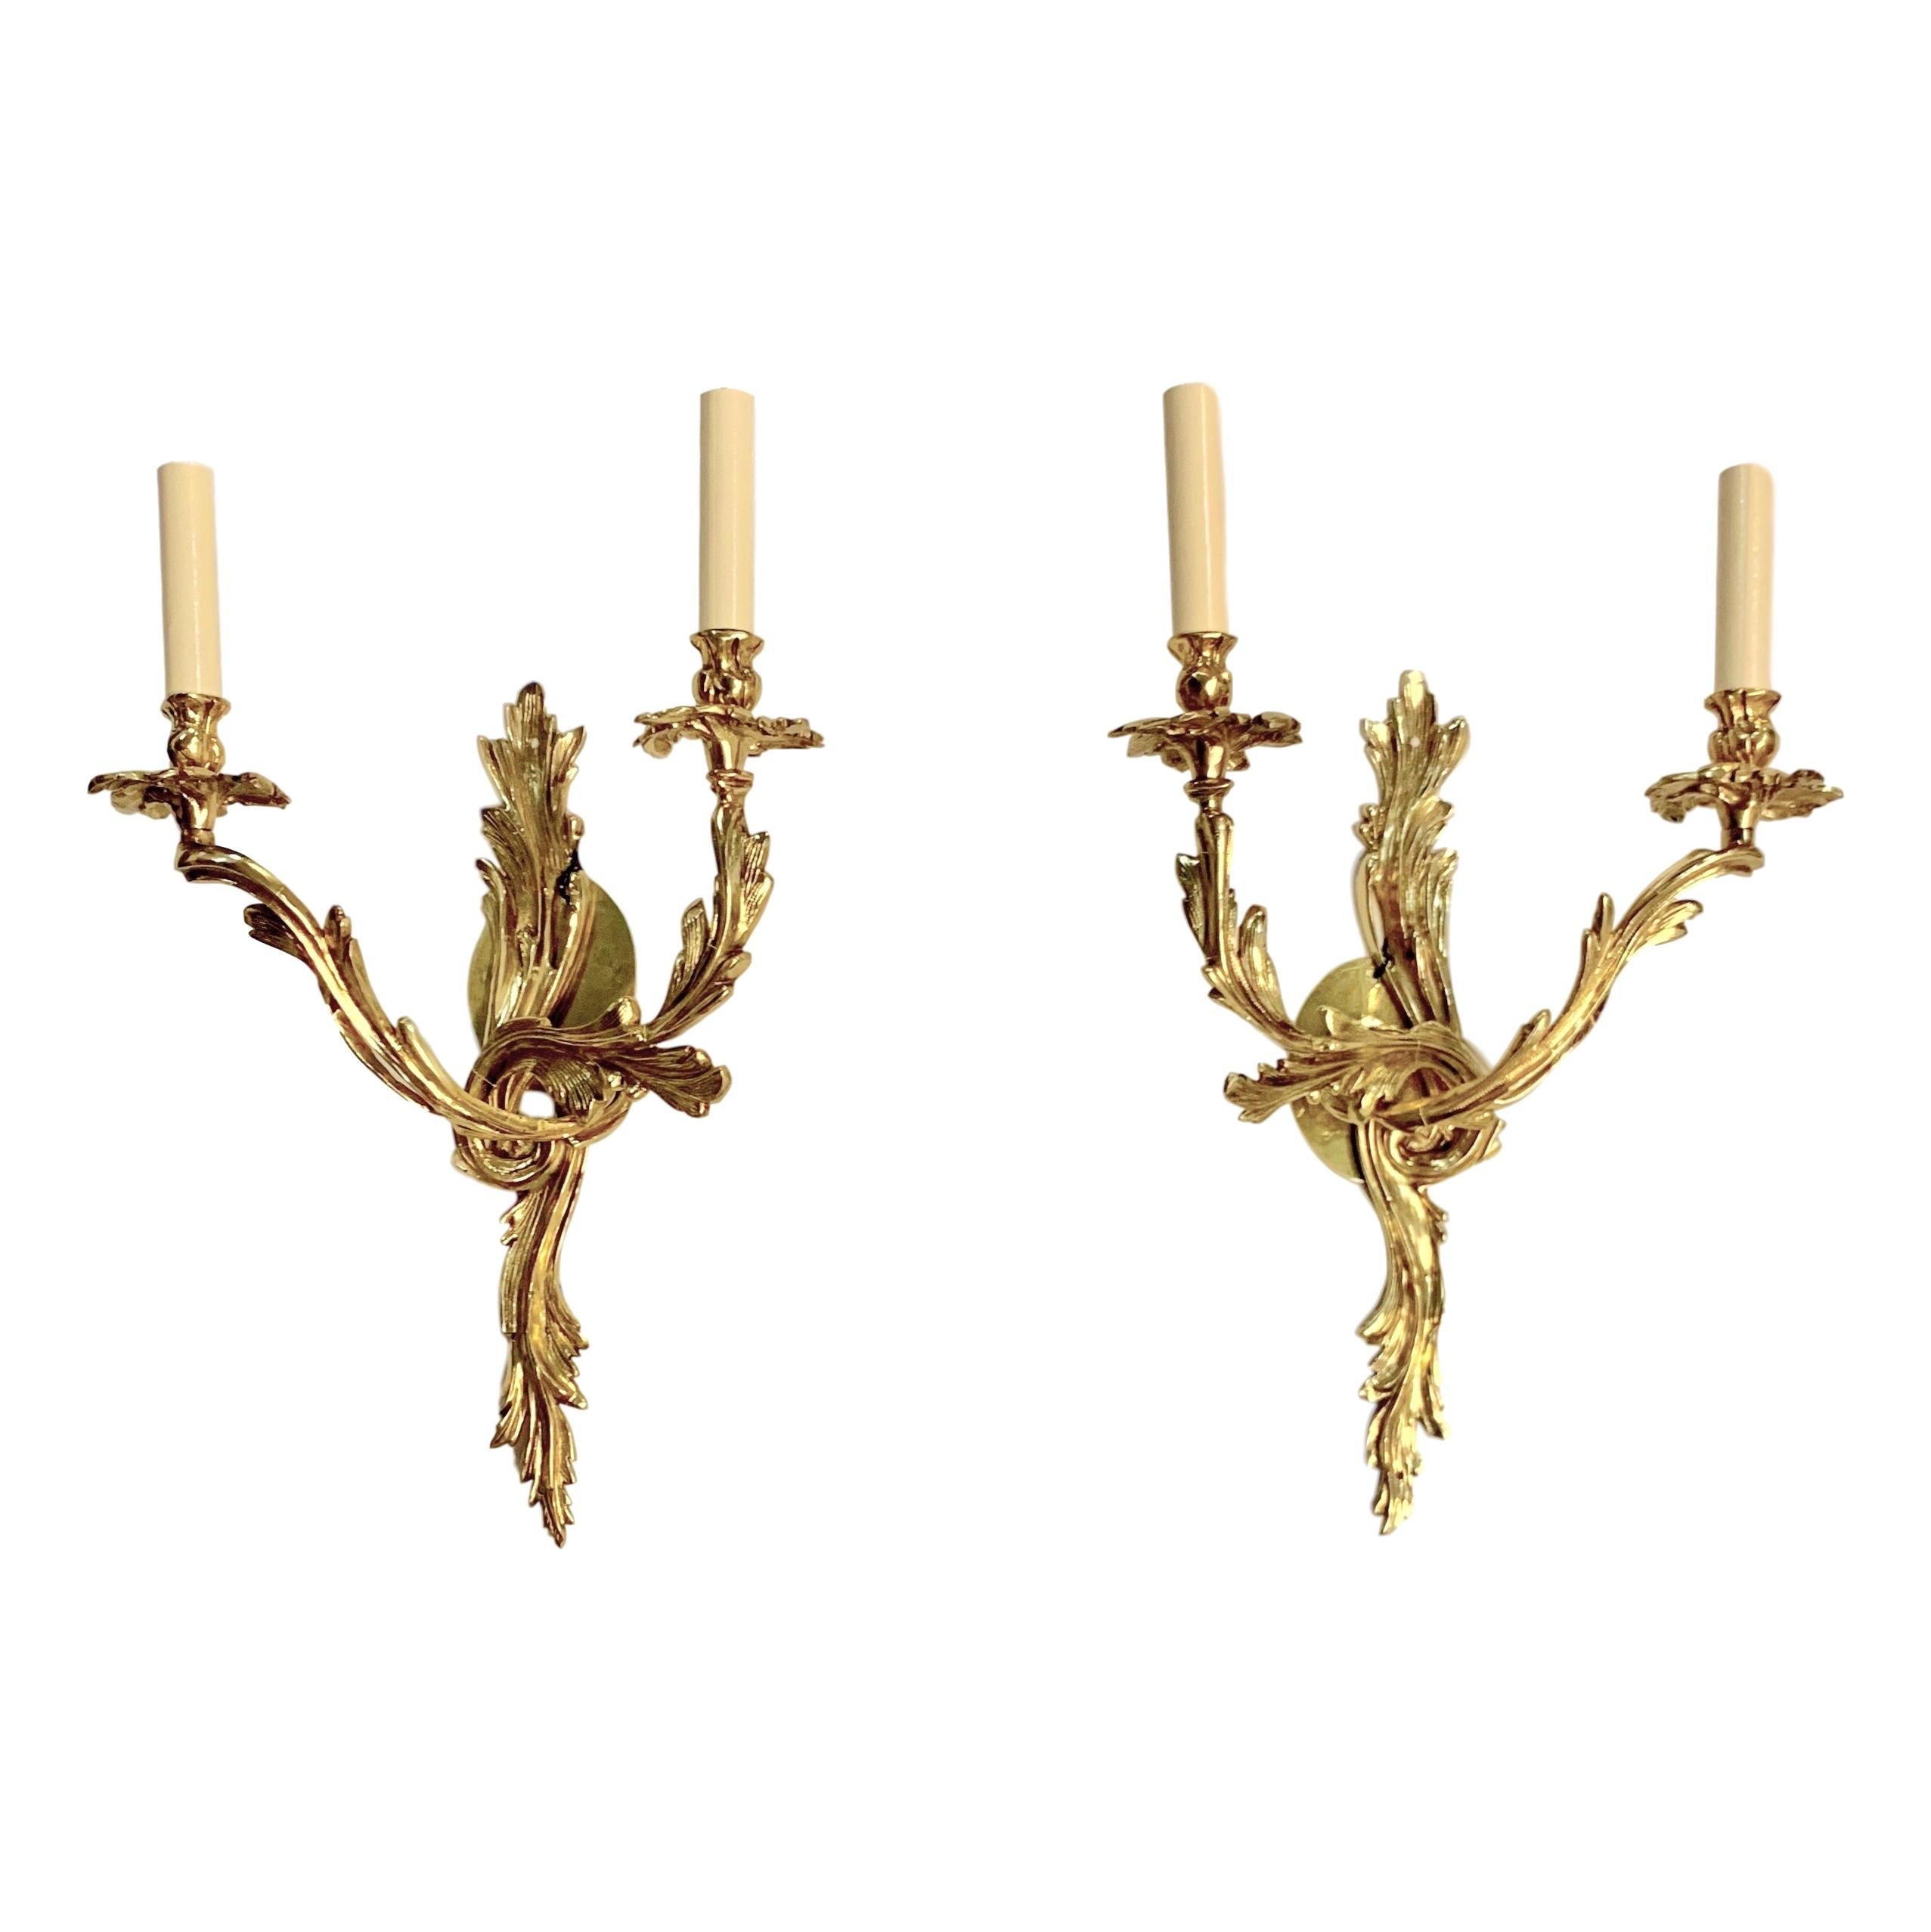 A pair of circa 1920's French Louis XV style gilt bronze 2-light sconces.

Measurements:
Height: 21